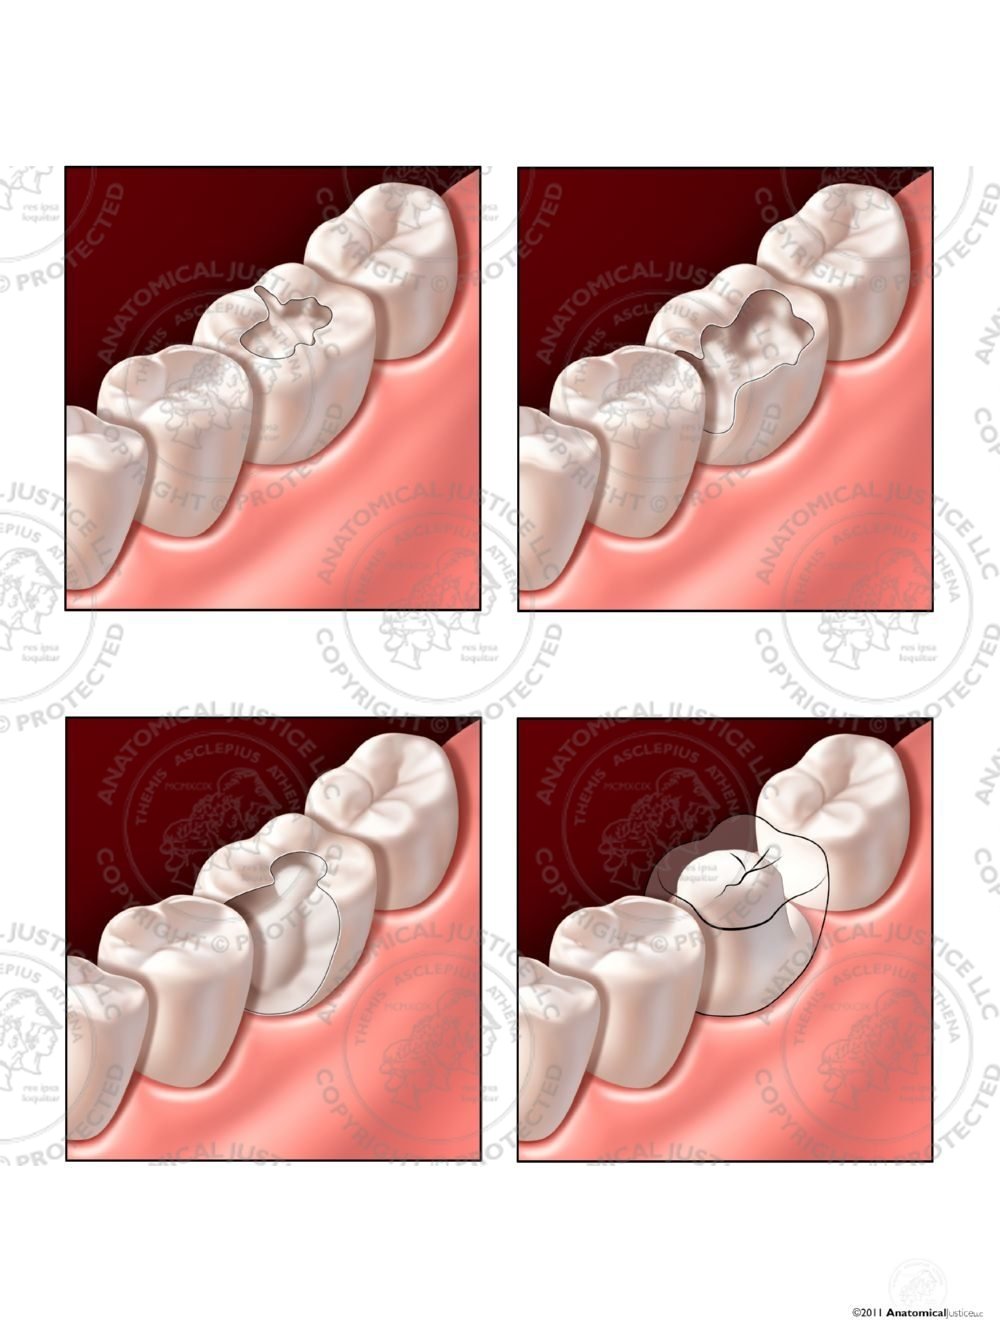 Treatment of Dental Cavities (Caries) and a Dental Crown – No Text